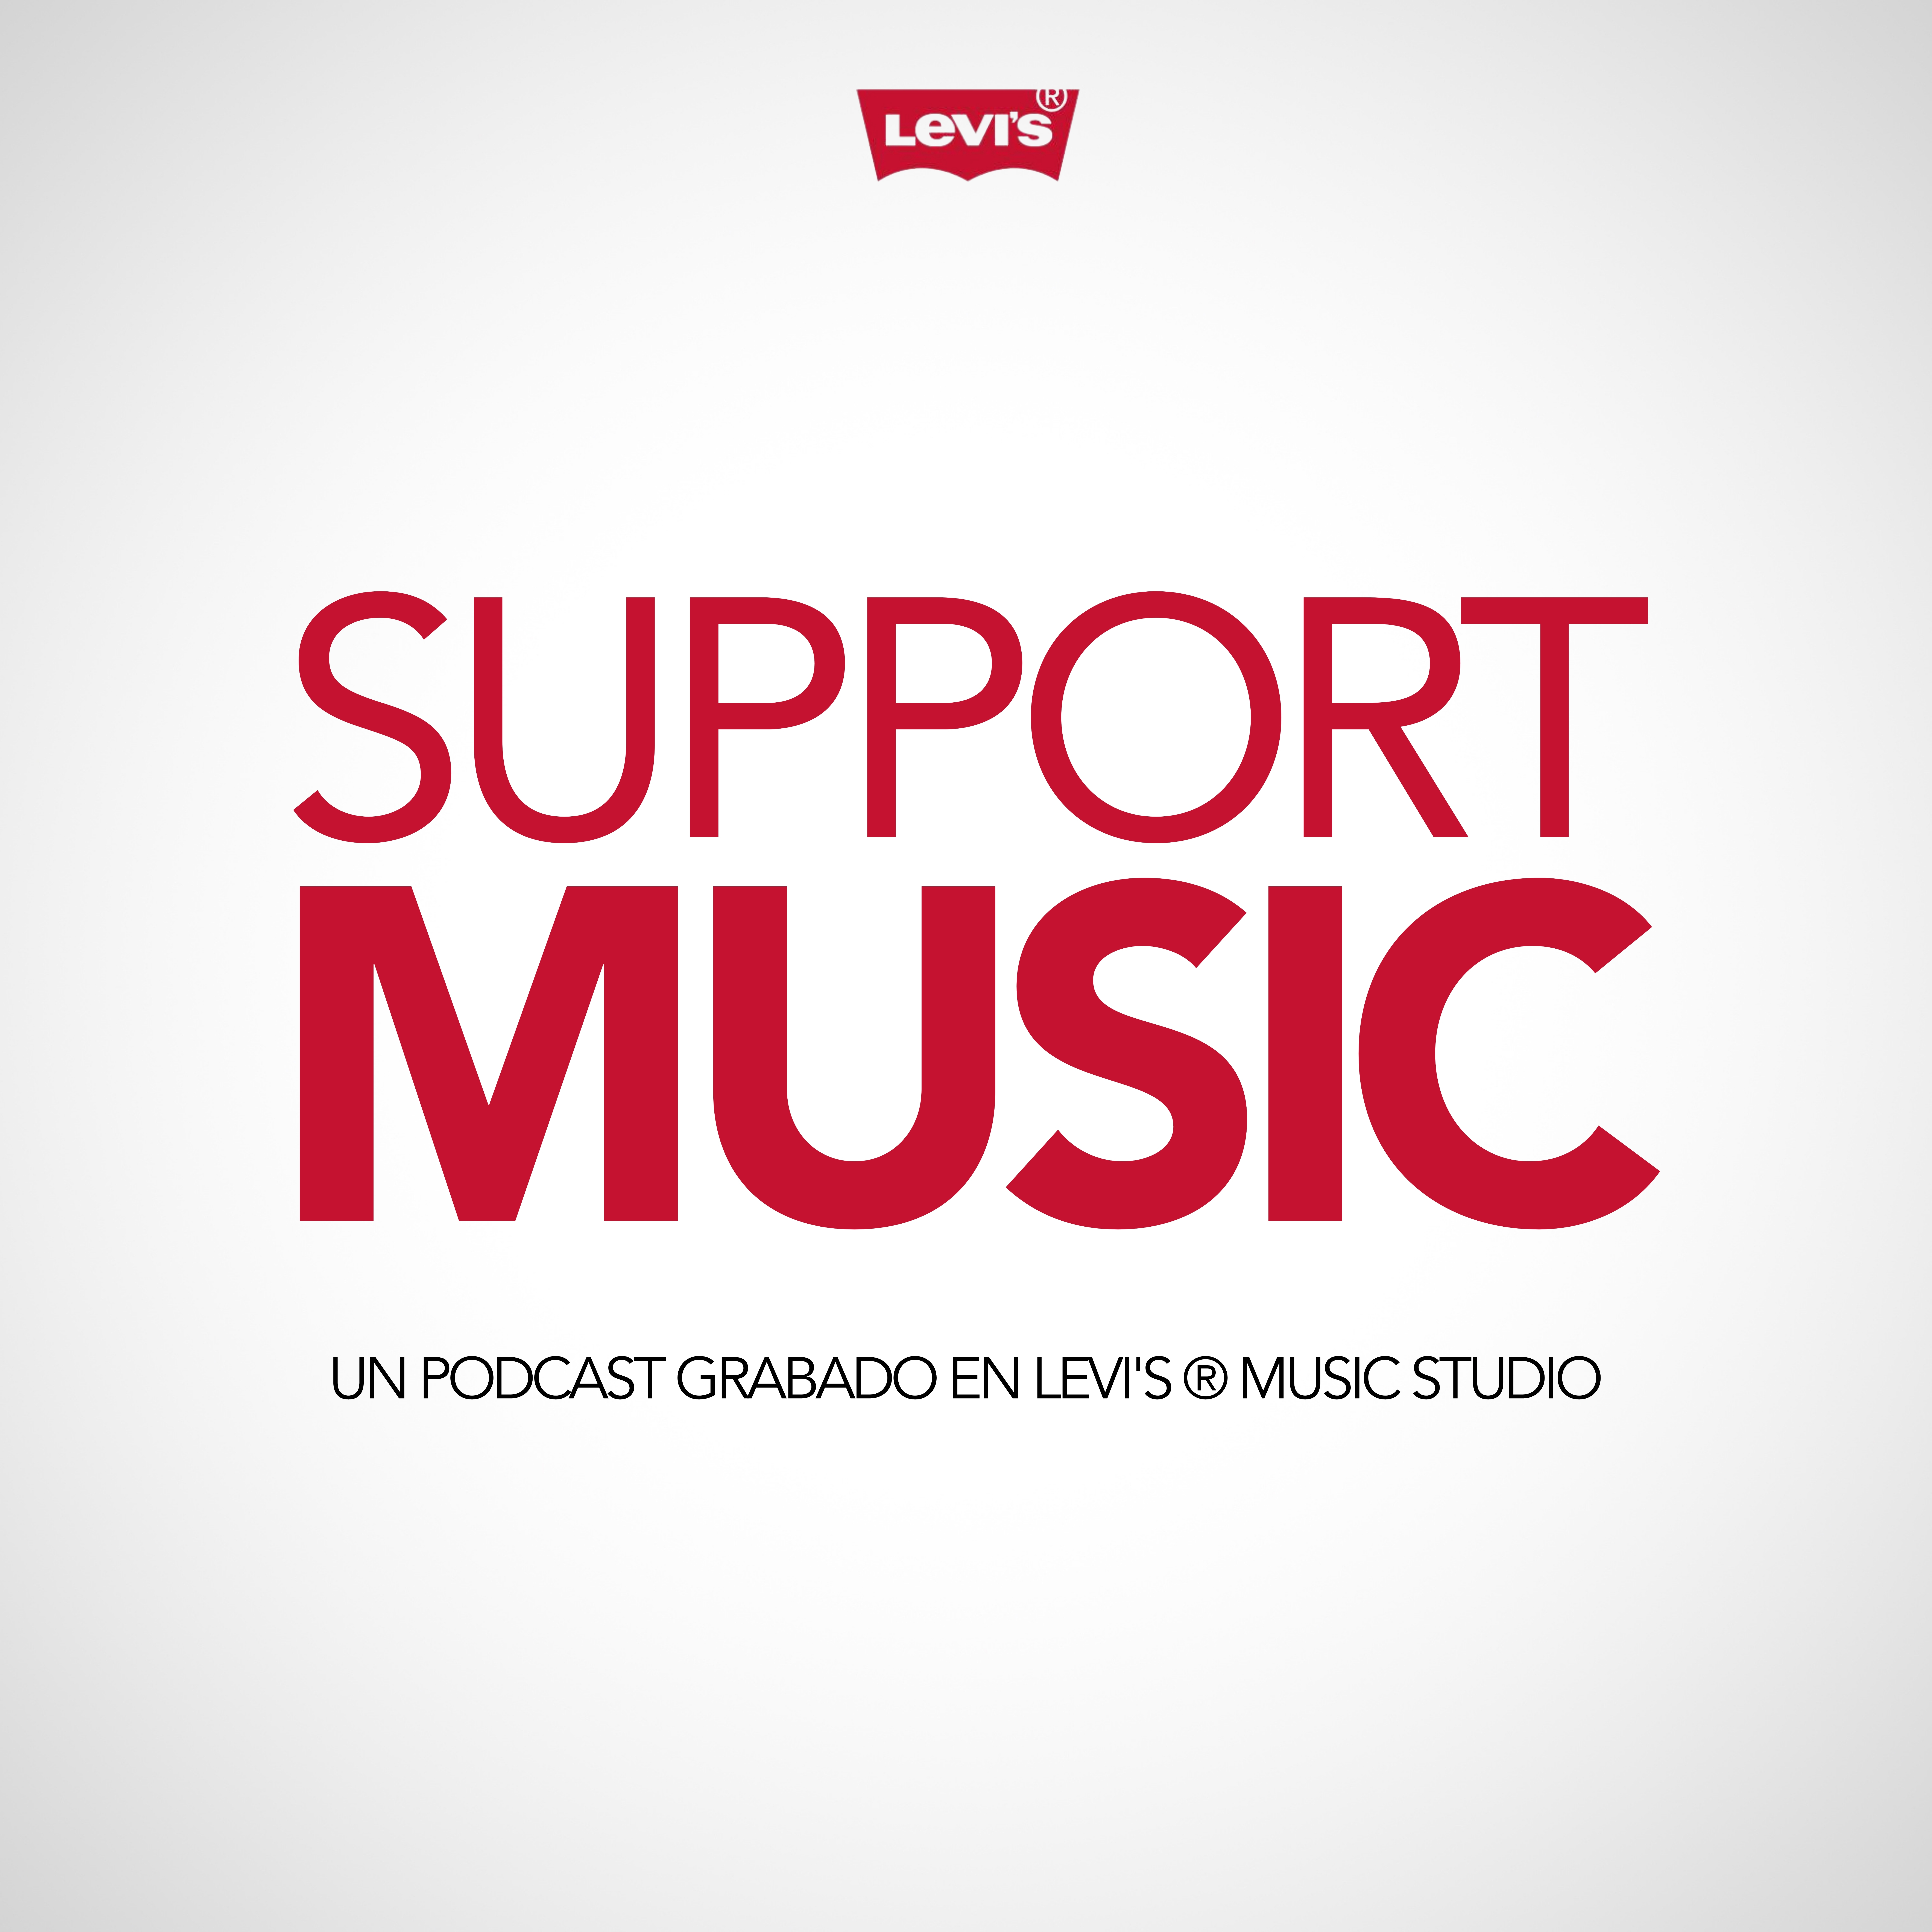 SUPPORT MUSIC